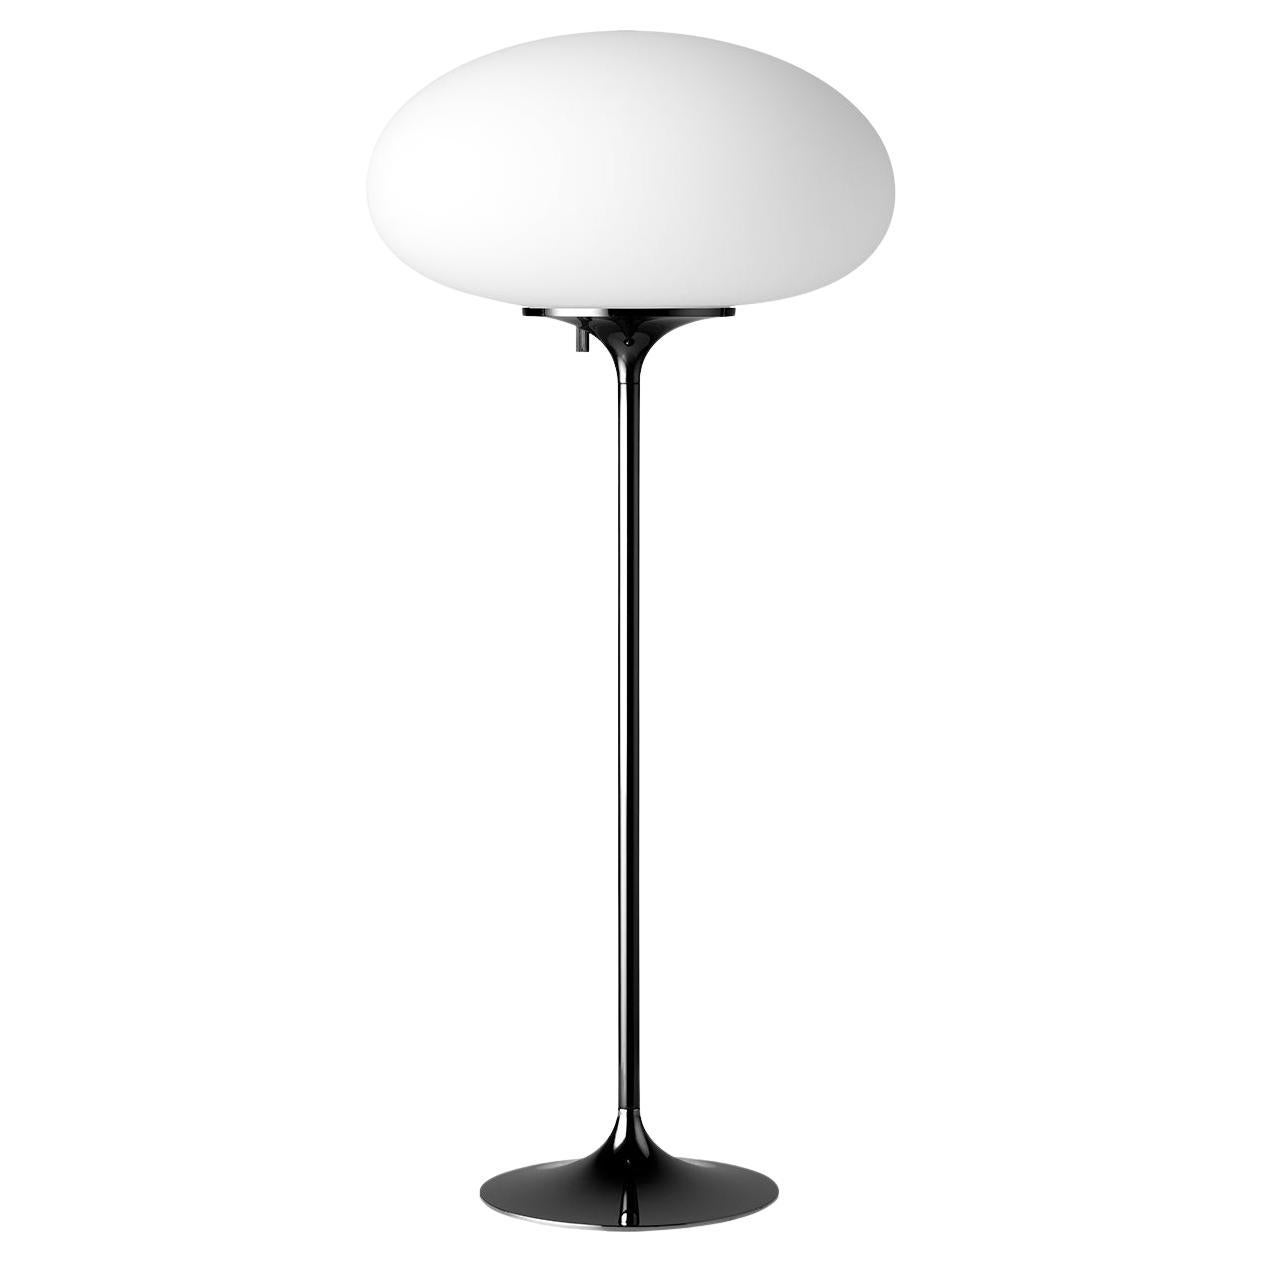 Stemlite Table Lamp, H70, Frosted Glass, Black Chrome